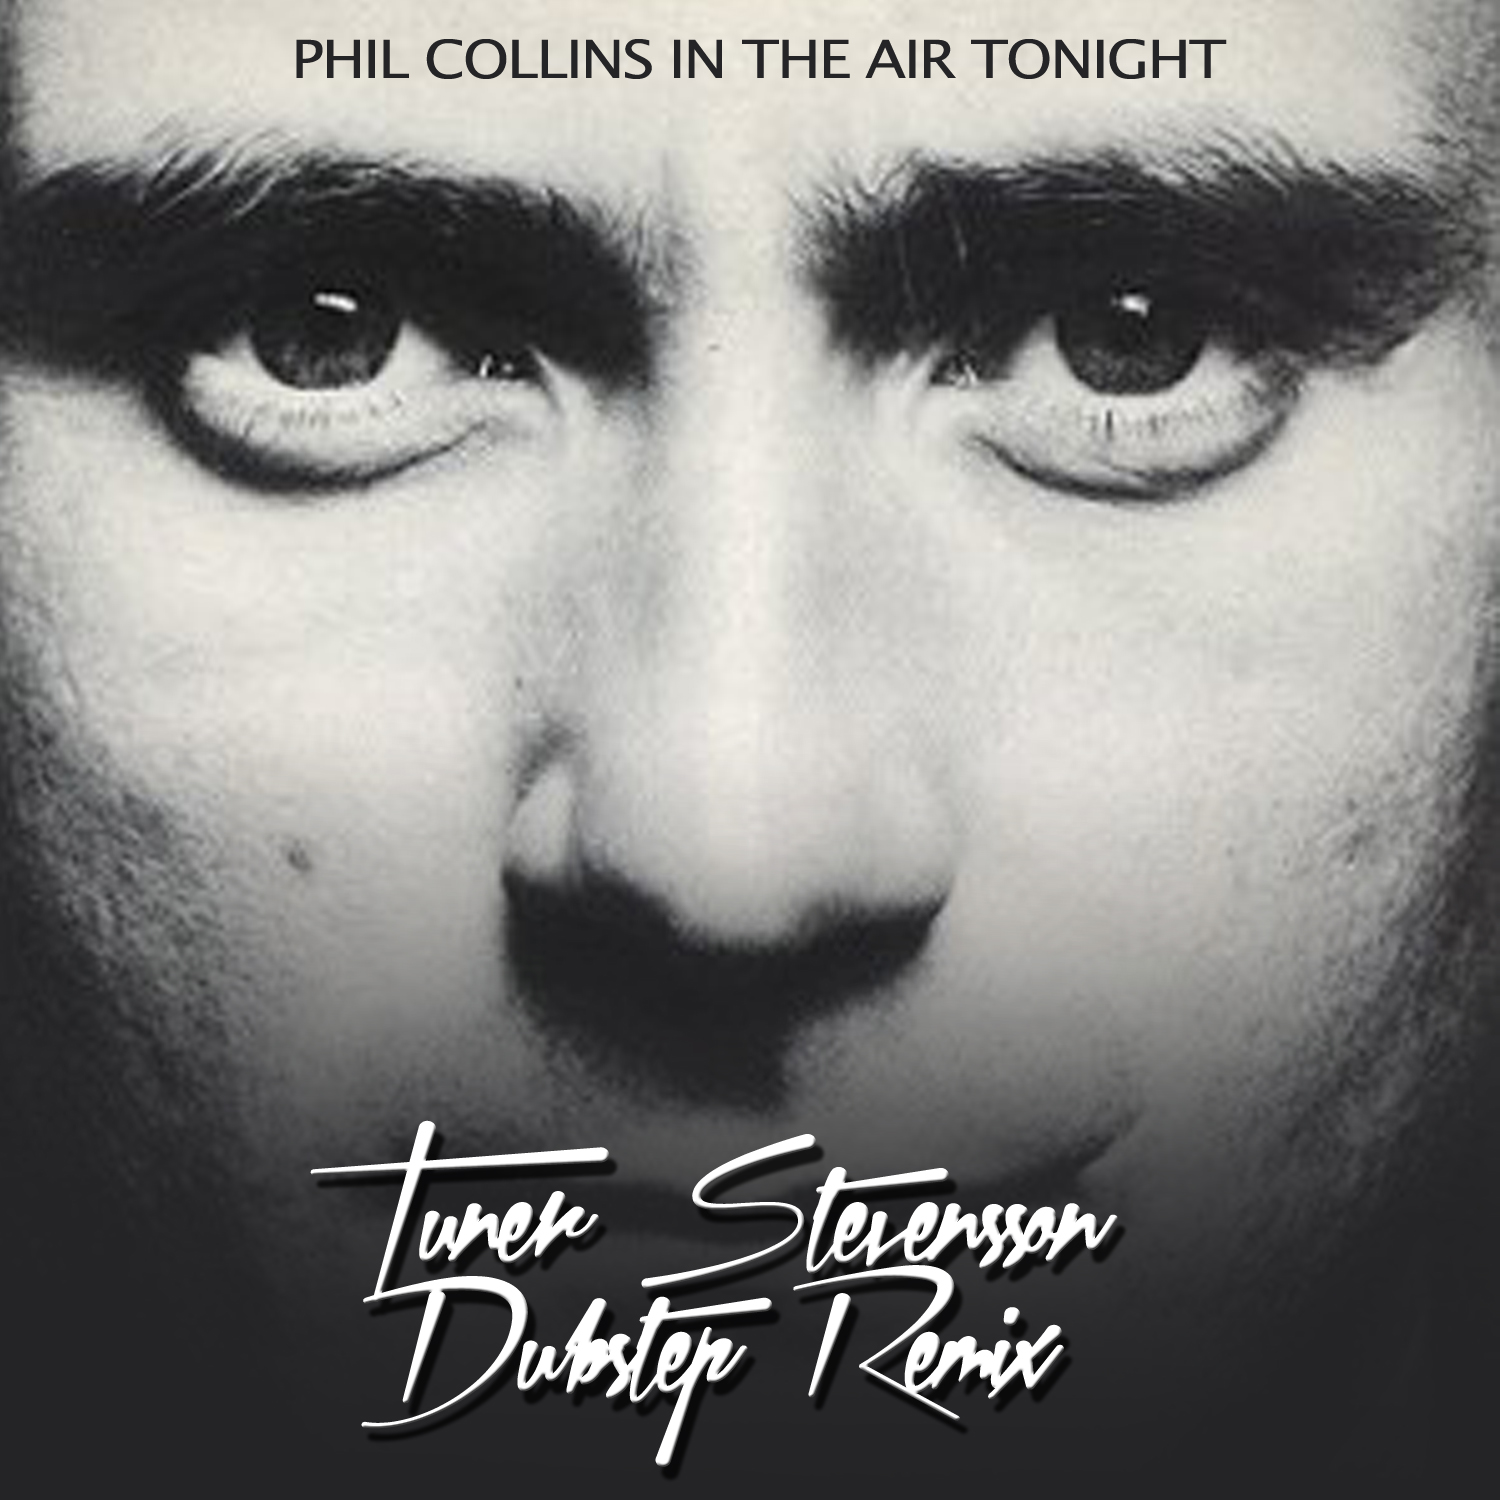 Feeling coming in the air. Phil Collins Air. Phil Collins face value 1981. Face value Фил Коллинз. Фил Коллинз 1979.